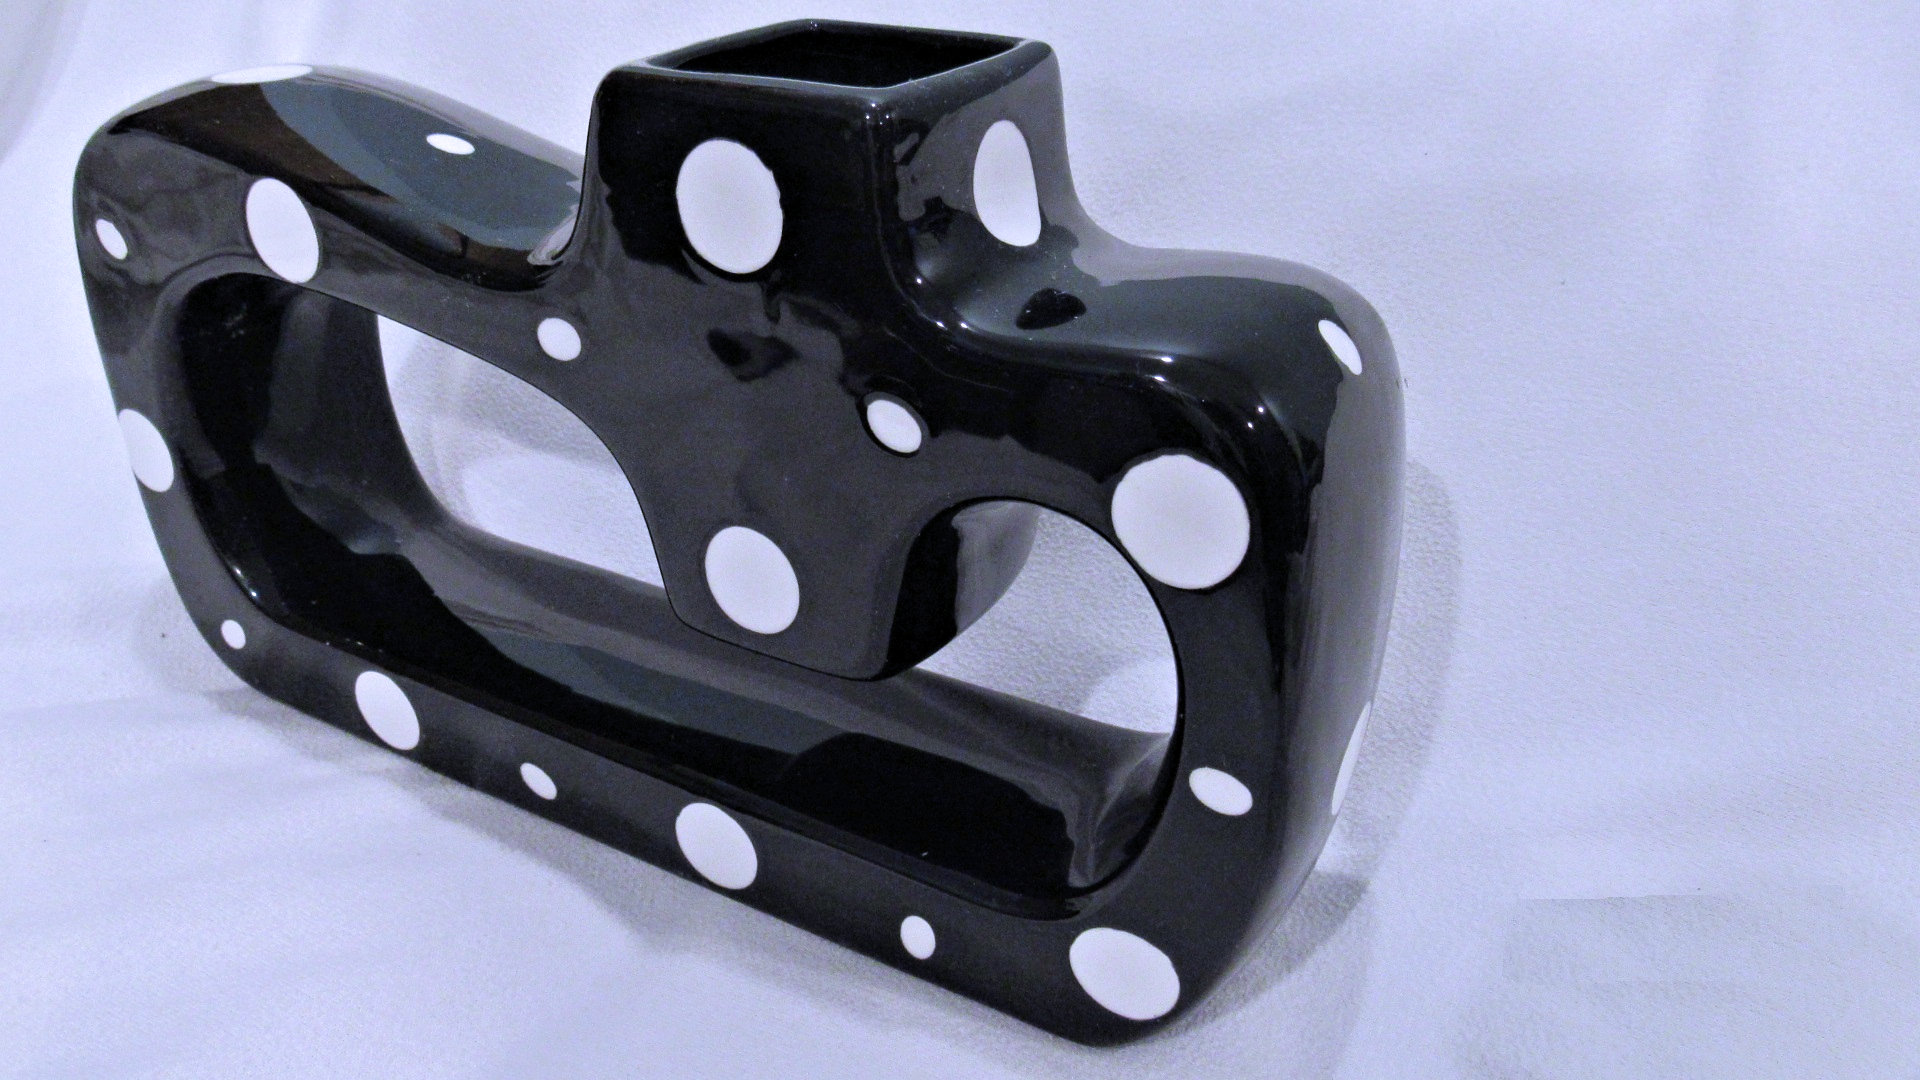 Black Ceramic Vase with White Polka Dots and Smooth Surface.